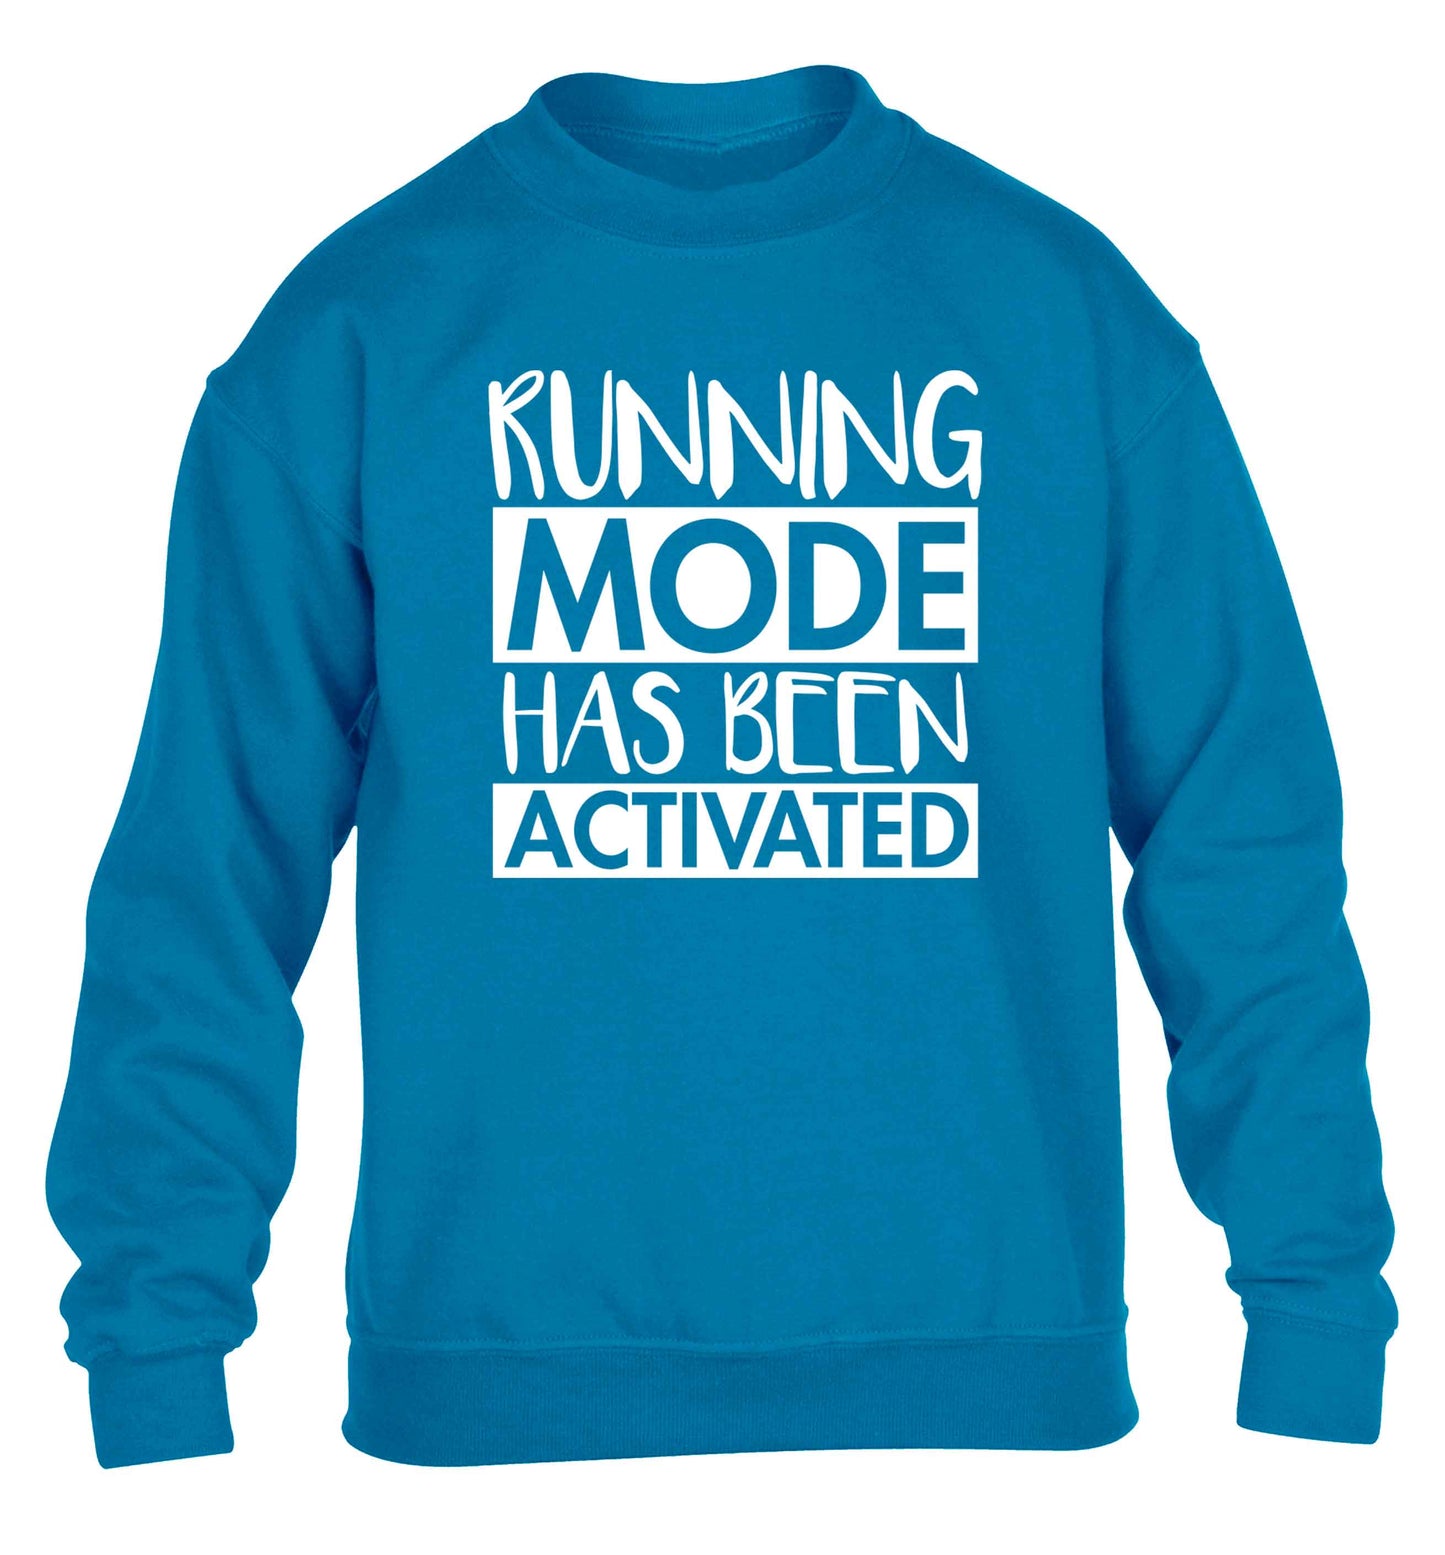 Running mode has been activated children's blue sweater 12-13 Years